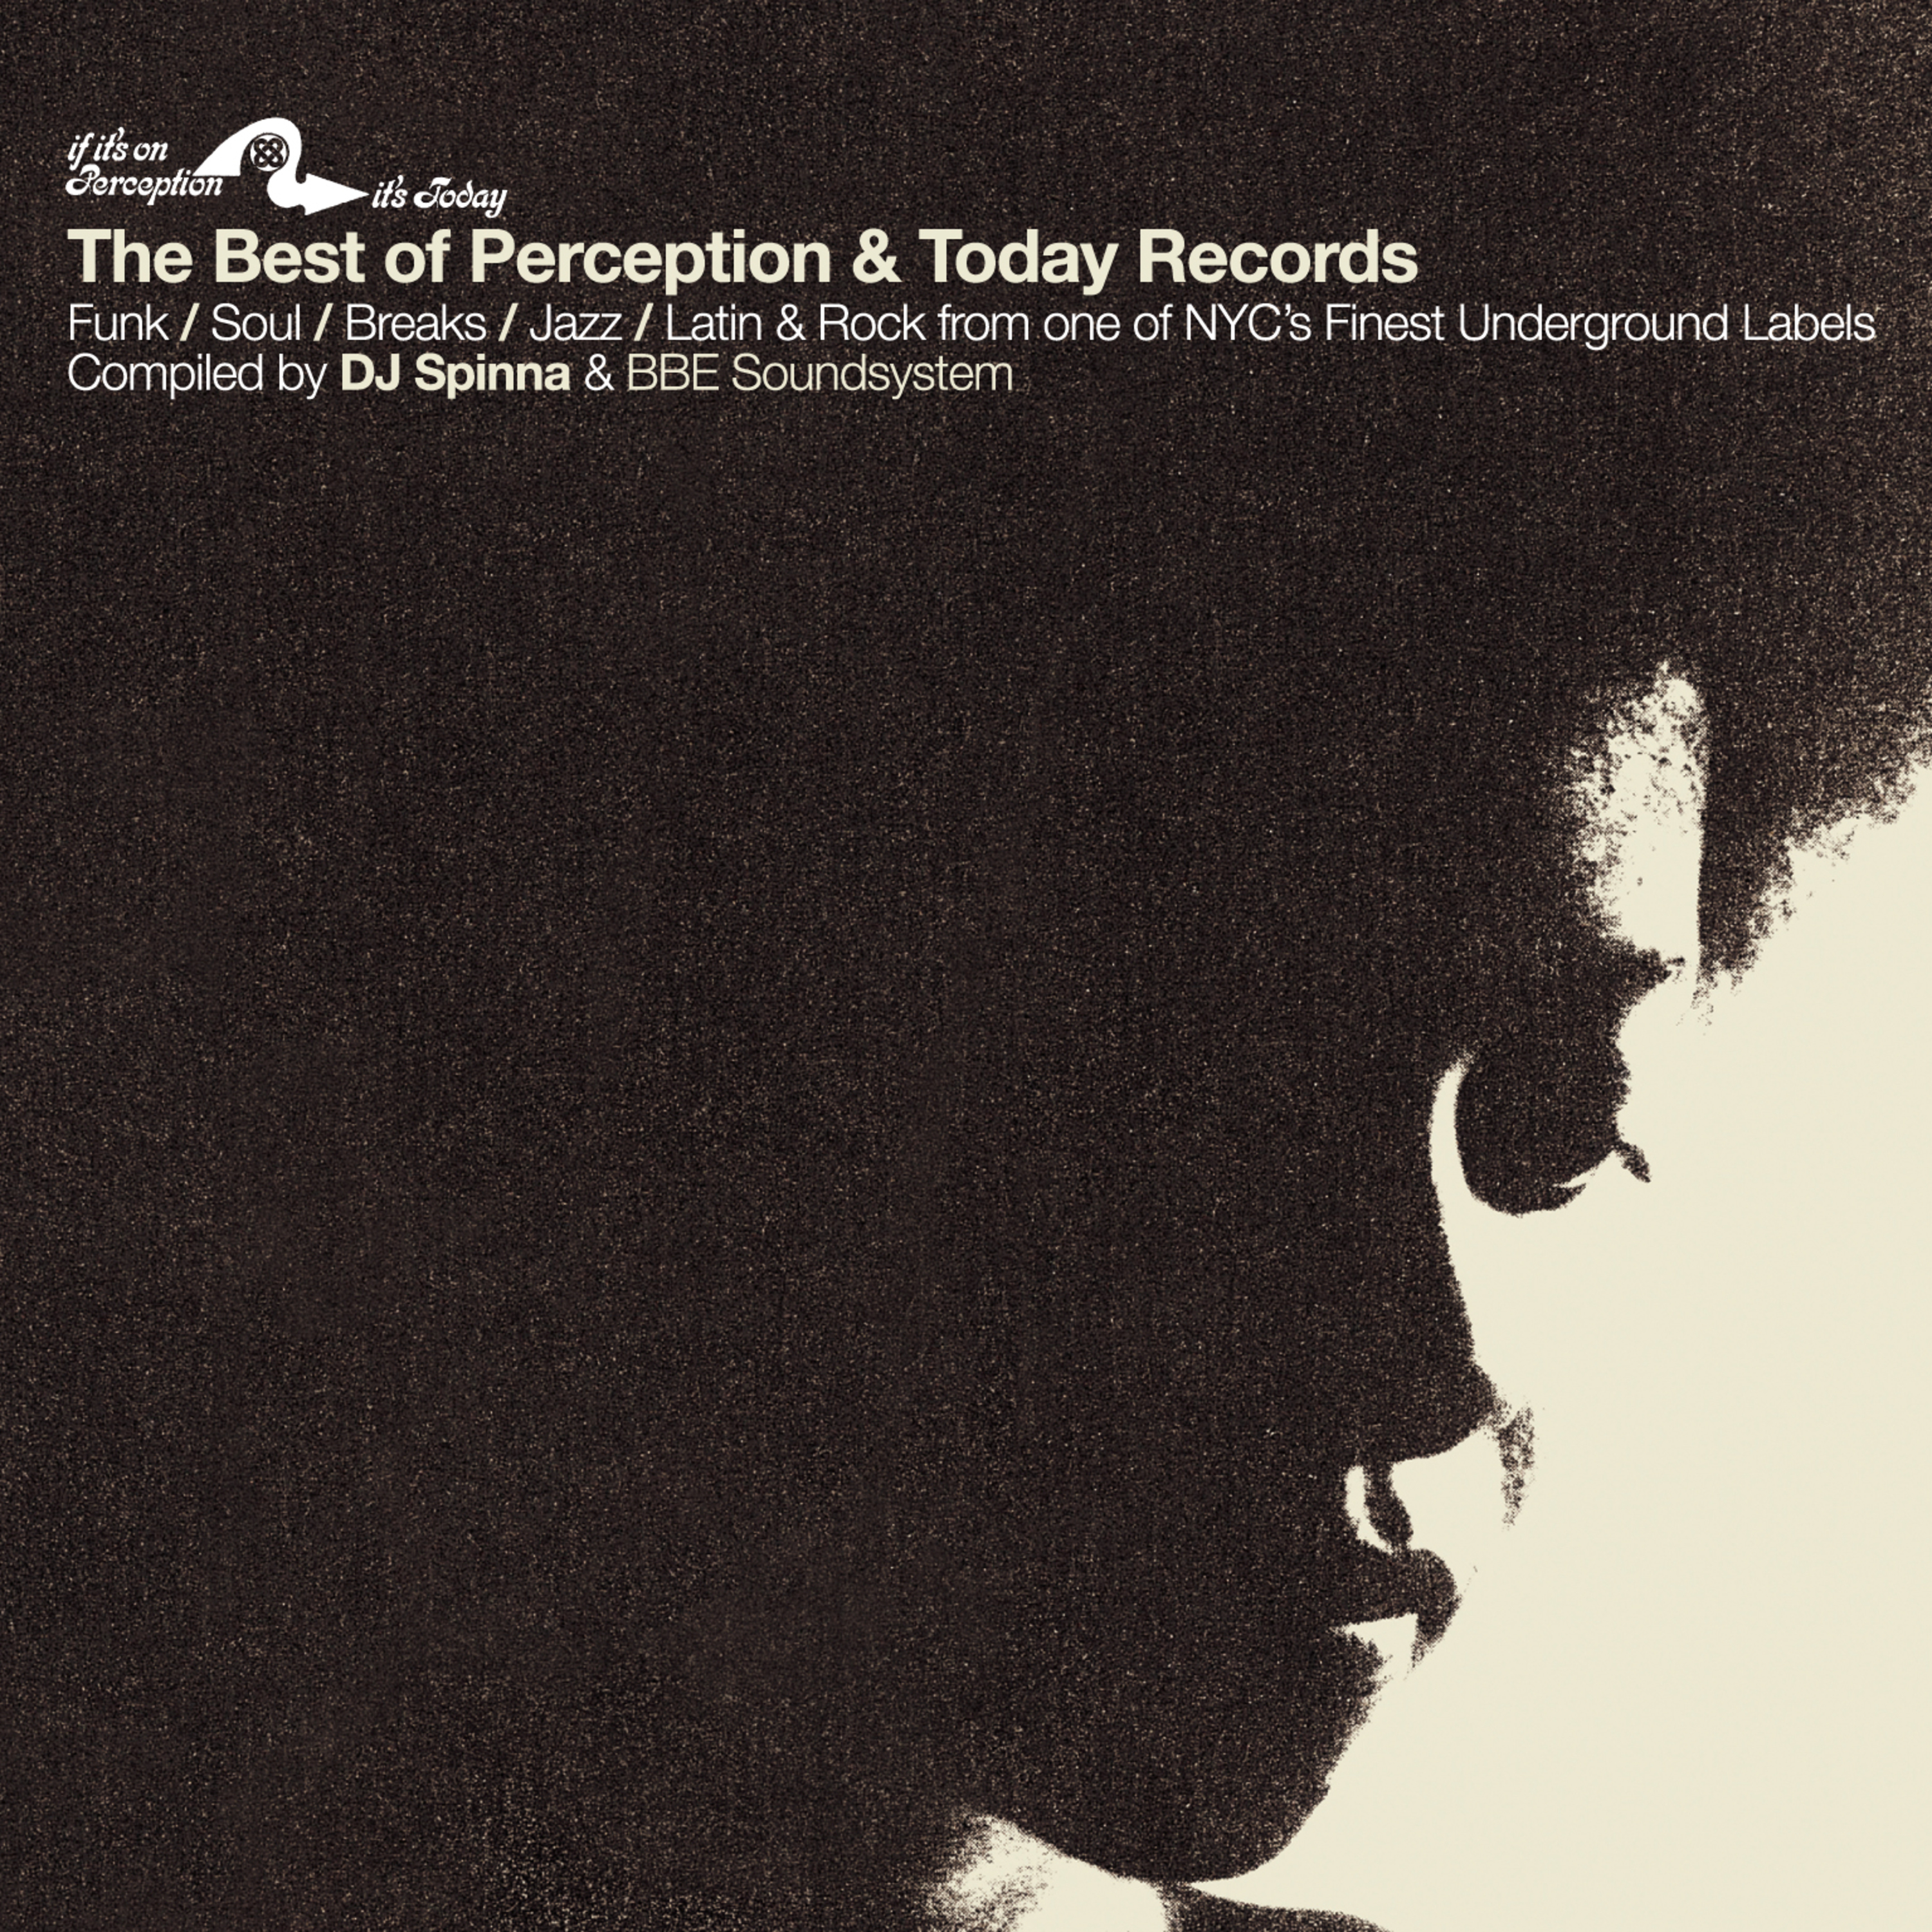 Best of Perception And Today Records compiled by DJ Spinna and BBE Soundsystem